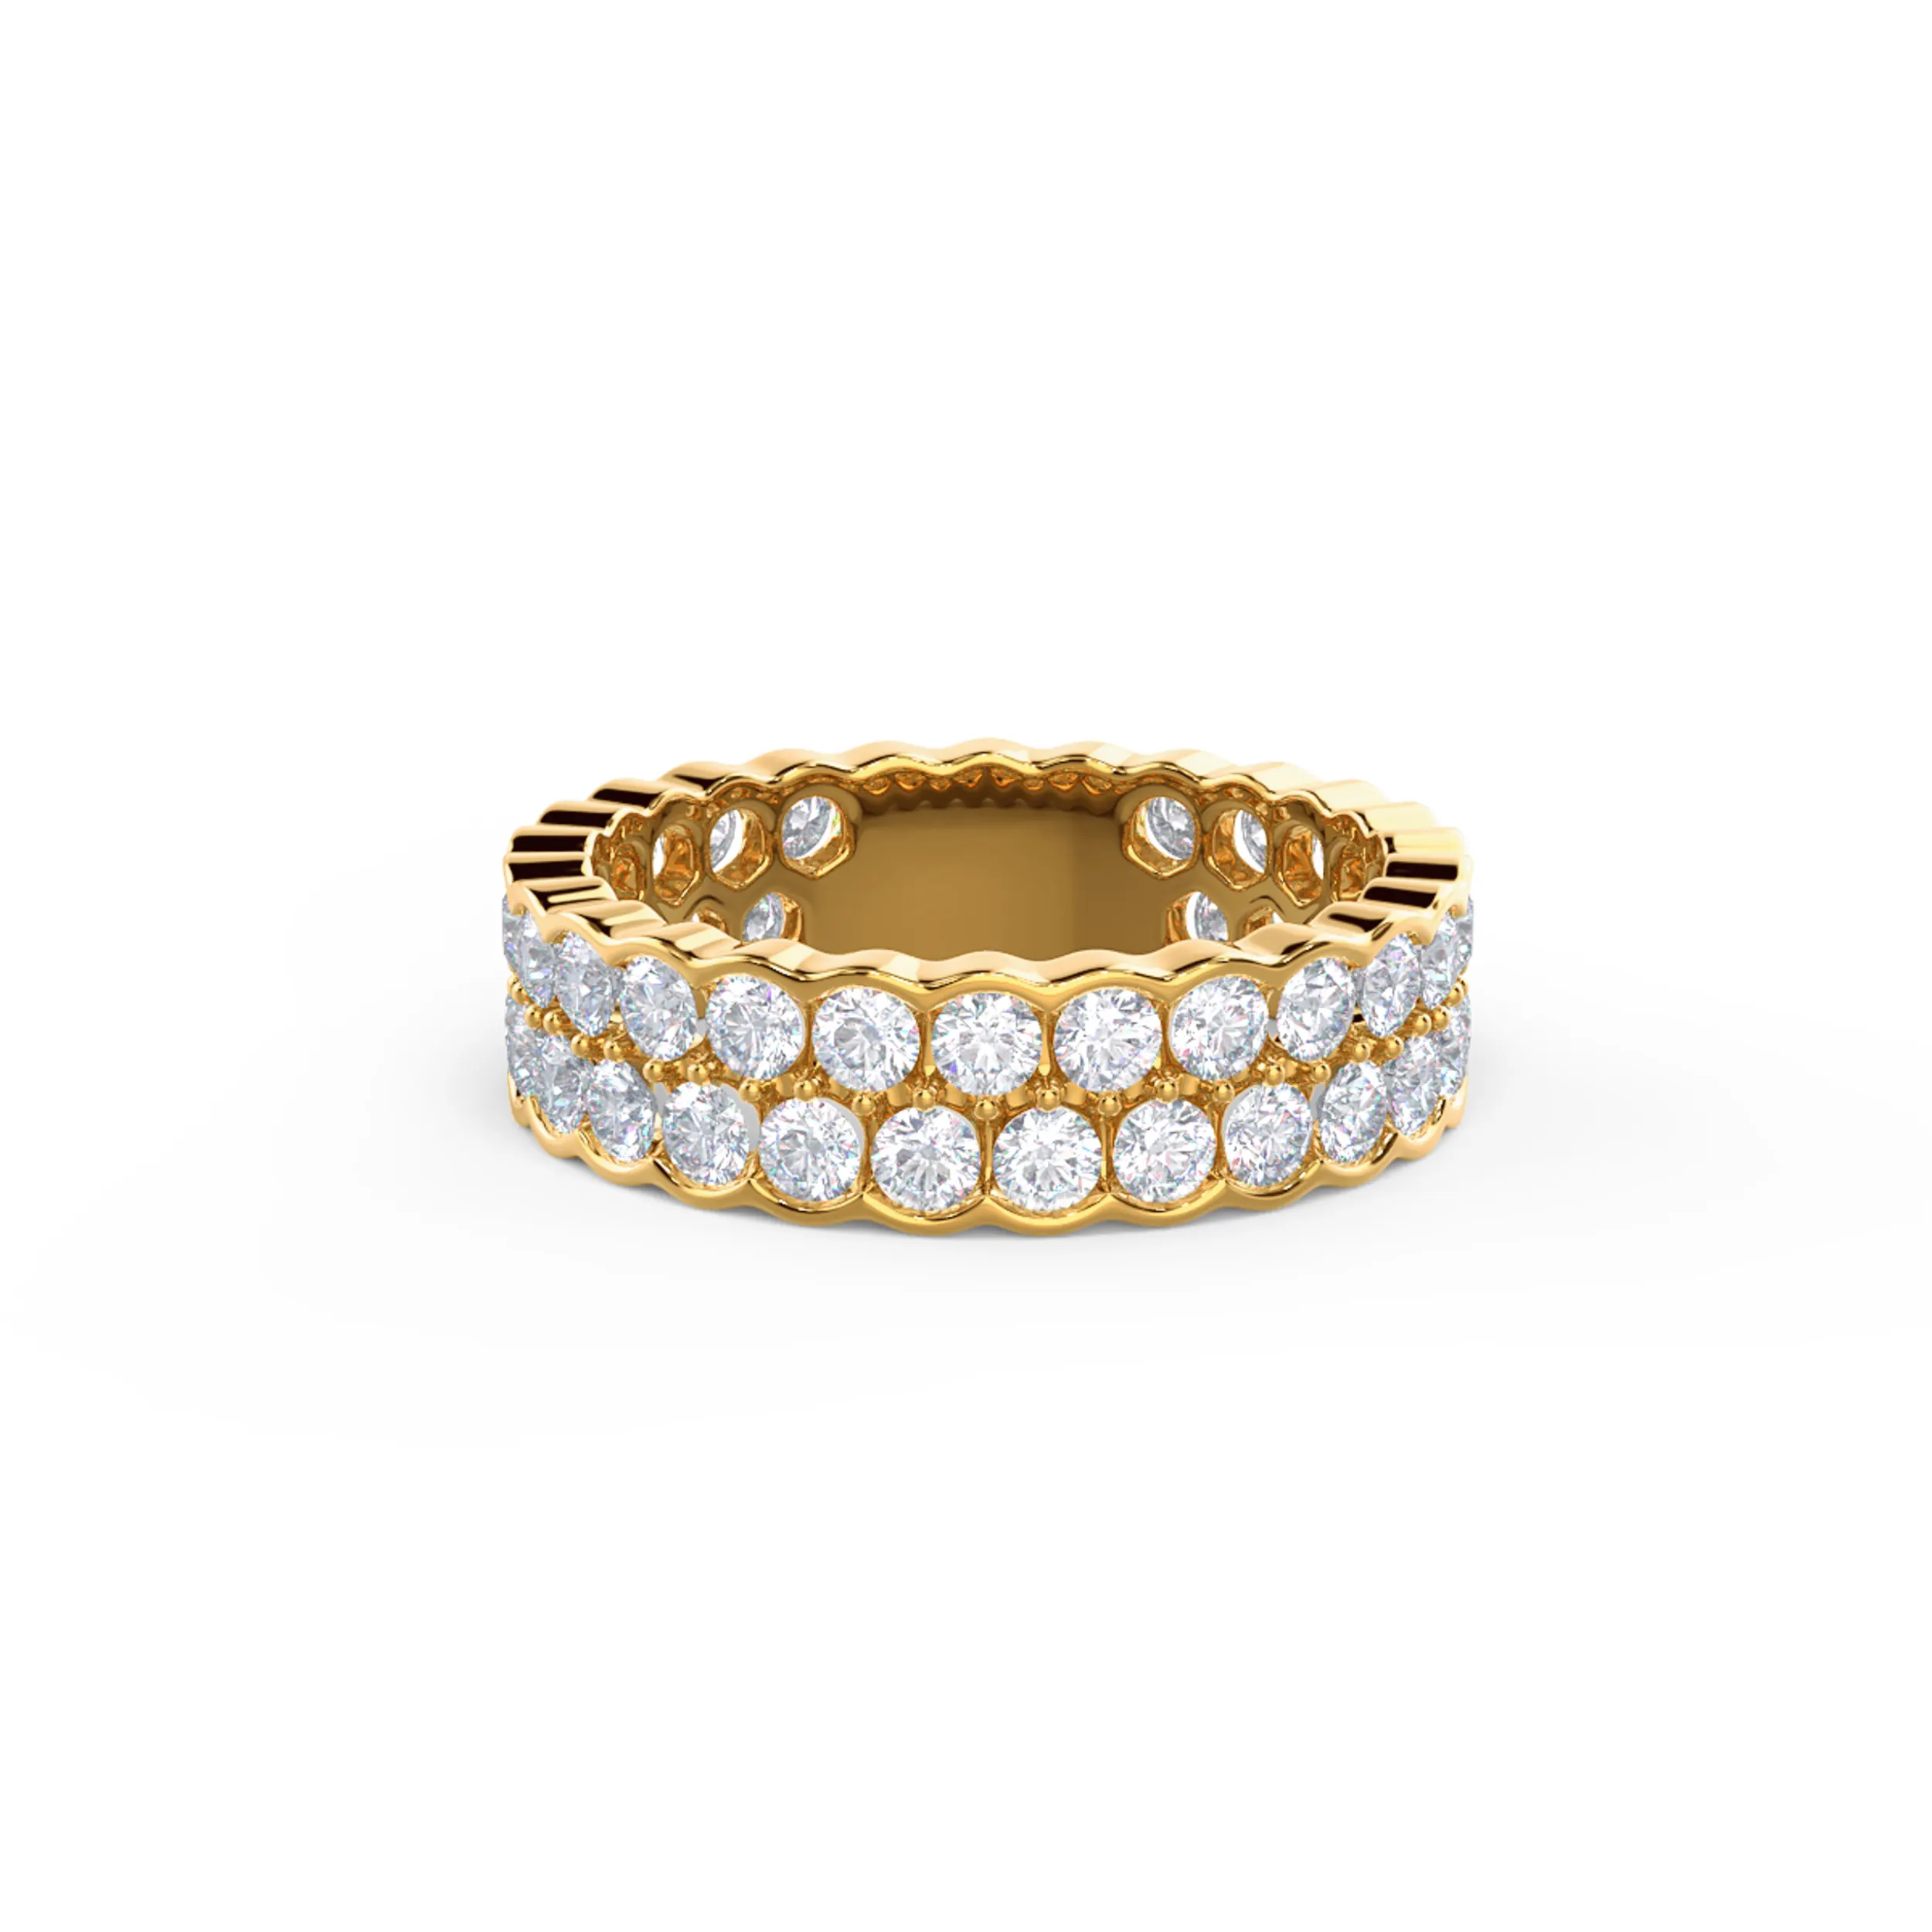 2.0 Carat Round Brilliant Diamonds Two Row Bezel Eternity Band in Yellow Gold (Main View)